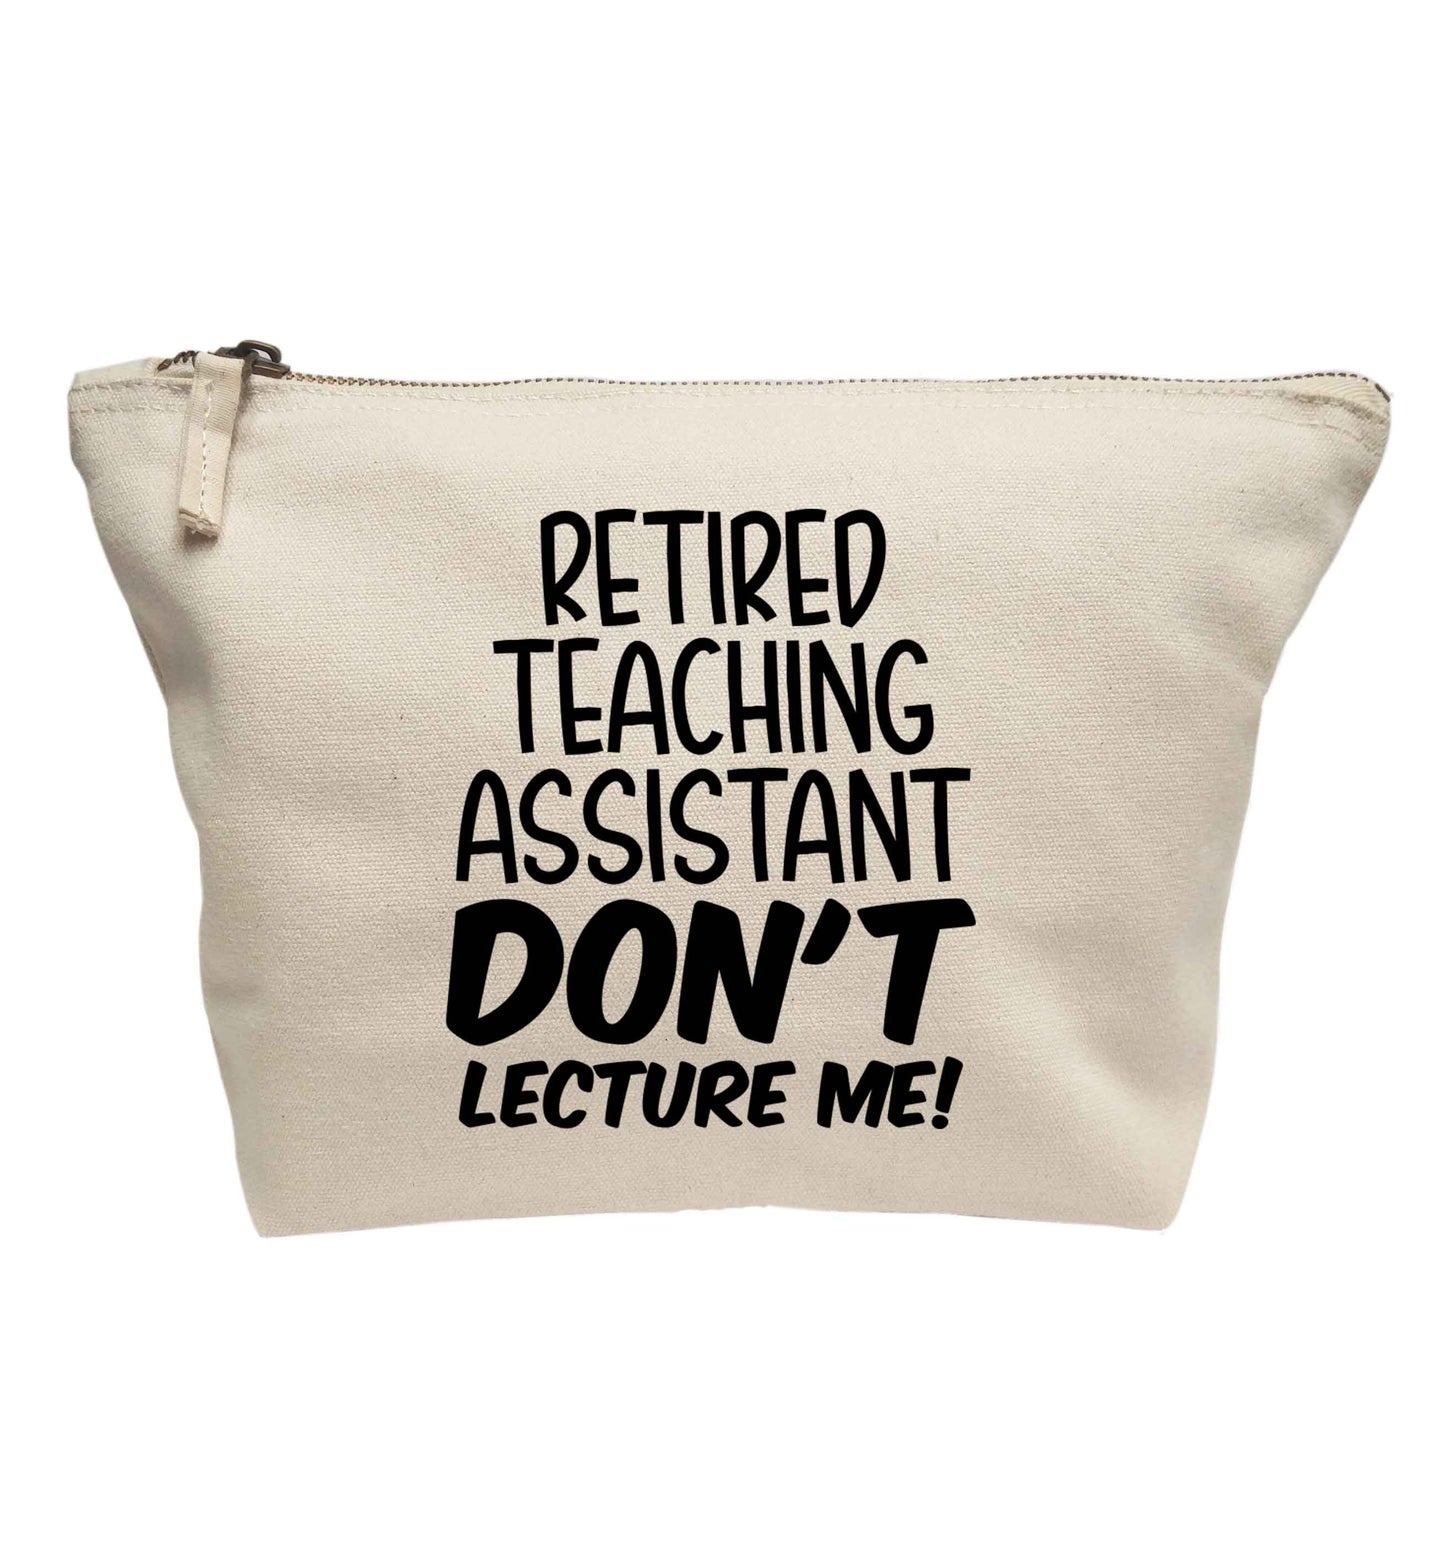 Retired teaching assistant don't lecture me | makeup / wash bag